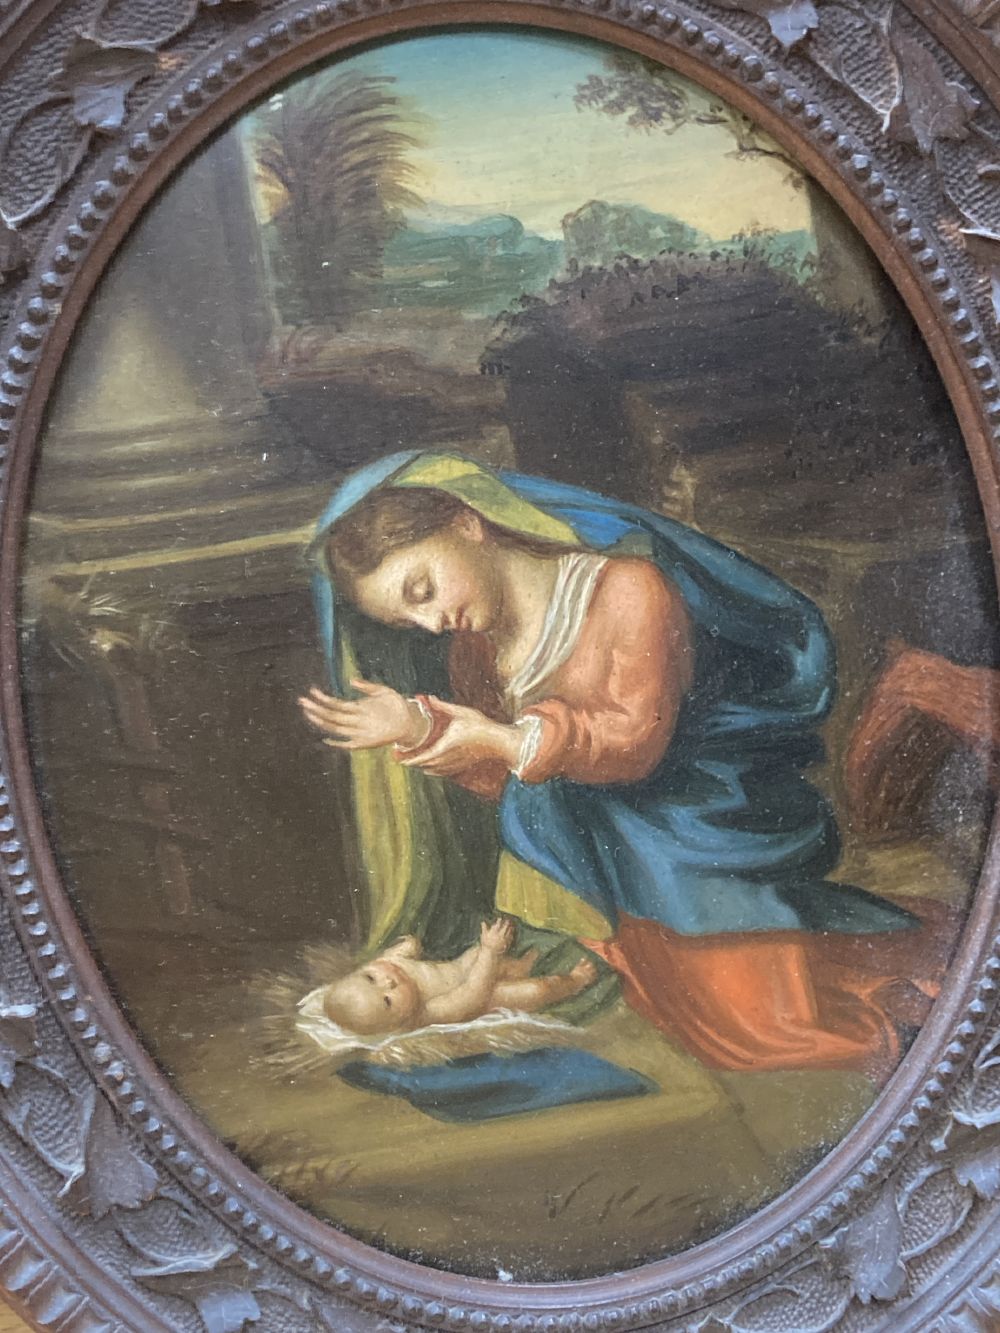 Italian School (19th century), study of the Madonna and Child, oval, 21 x 16cm, in carved wood frame